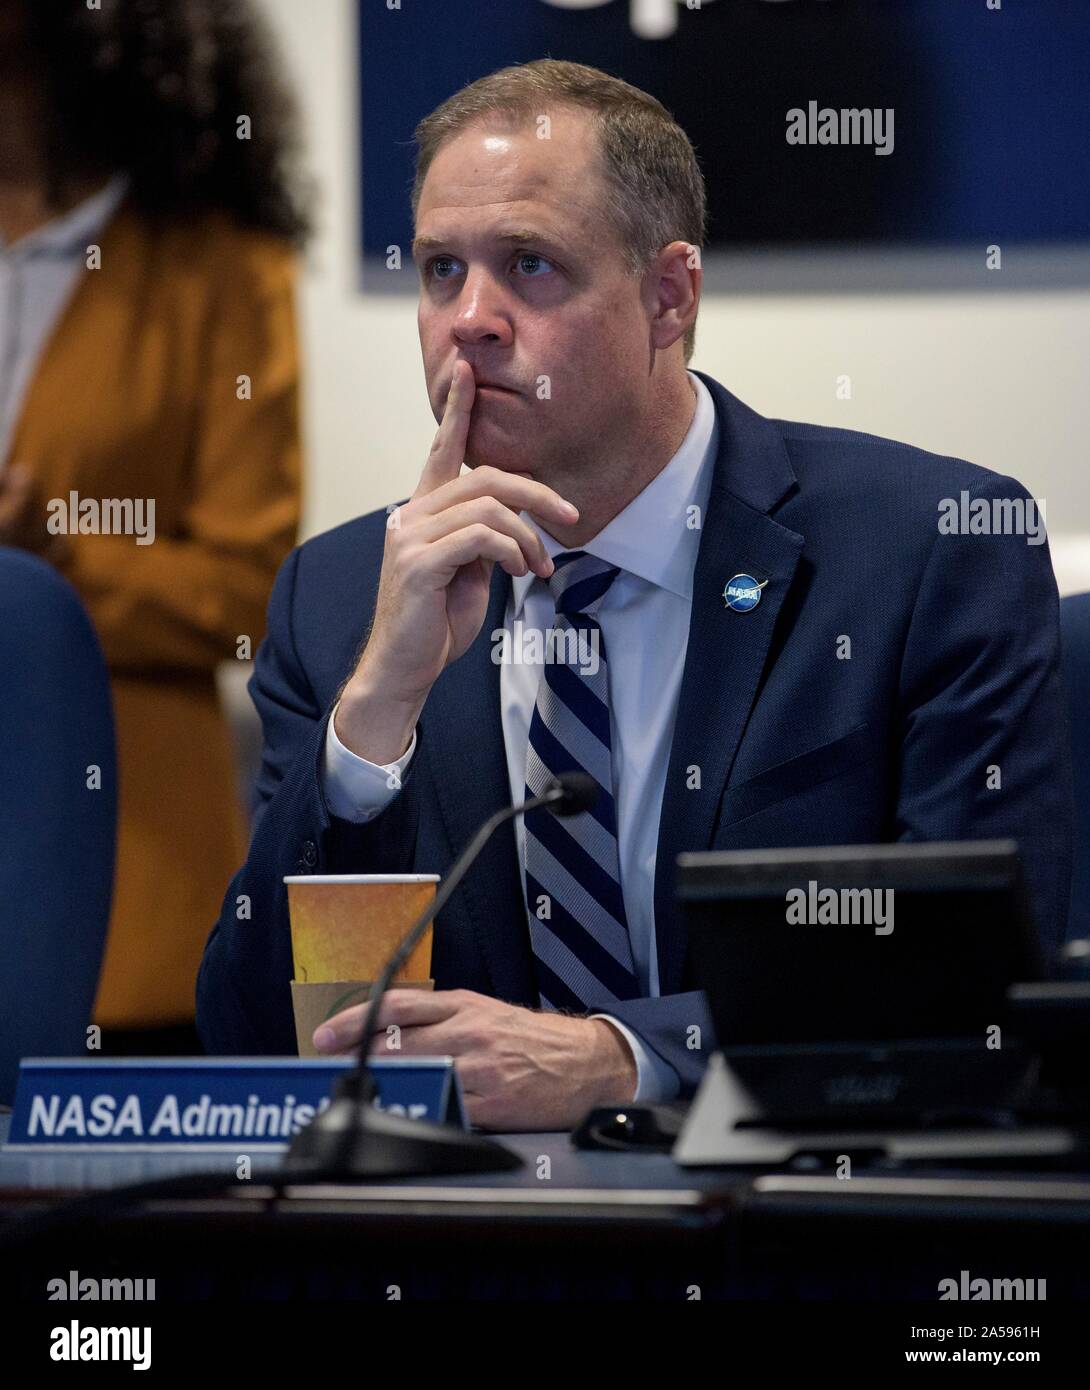 Washington, United States of America. 18 October, 2019. NASA Administrator Jim Bridenstine watches NASA astronauts Christina Koch and Jessica Meir during the first all-woman spacewalk from the Space Operations Center October 18, 2019 in Washington, DC. Credit: Joel Kowsky/NASA/Alamy Live News Stock Photo